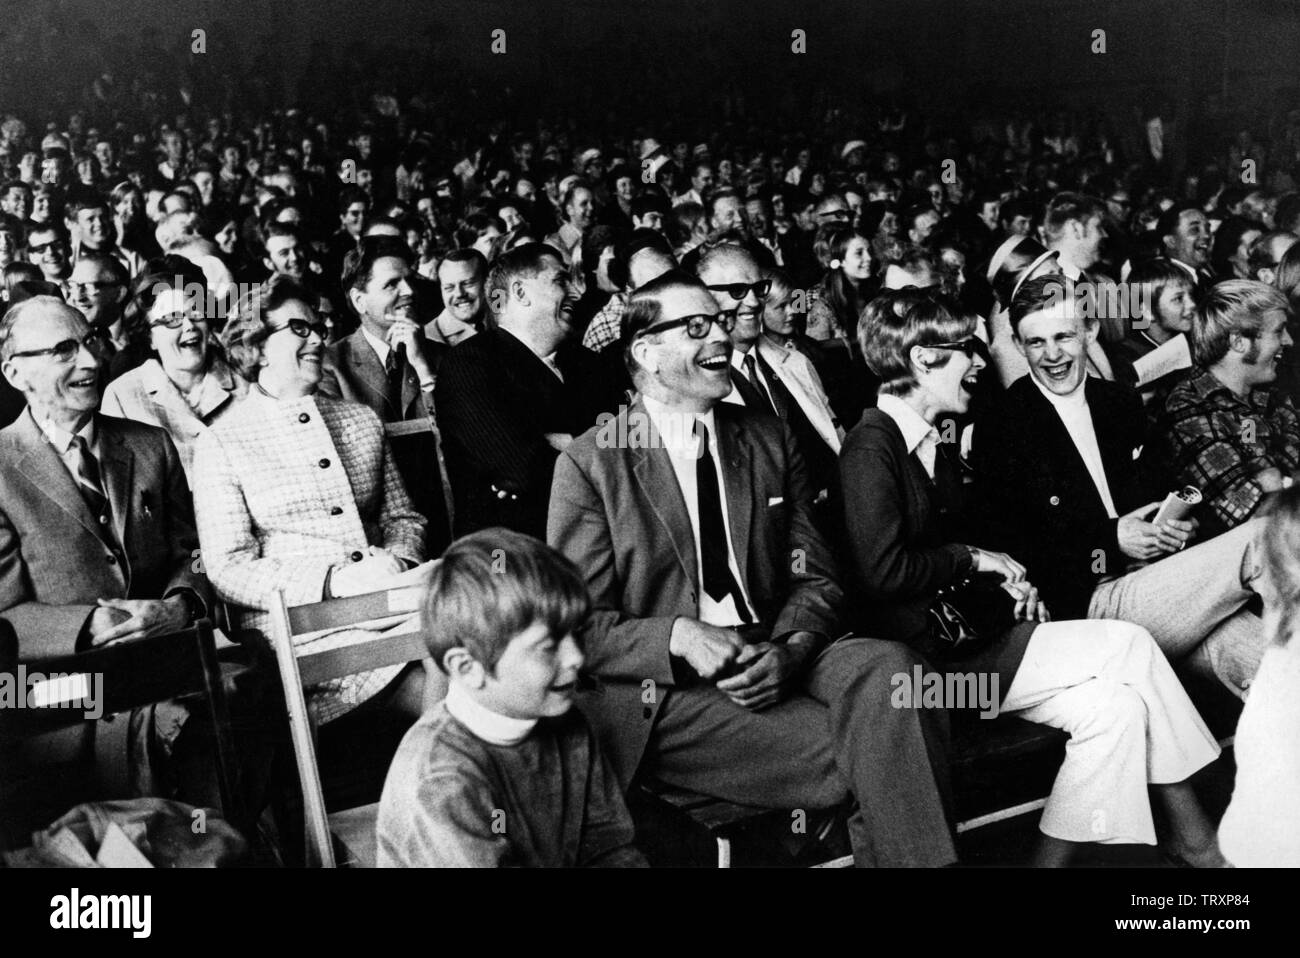 Audience in the 1960s. They are all laughing at something or someone on the stage. Sweden 1960s Stock Photo